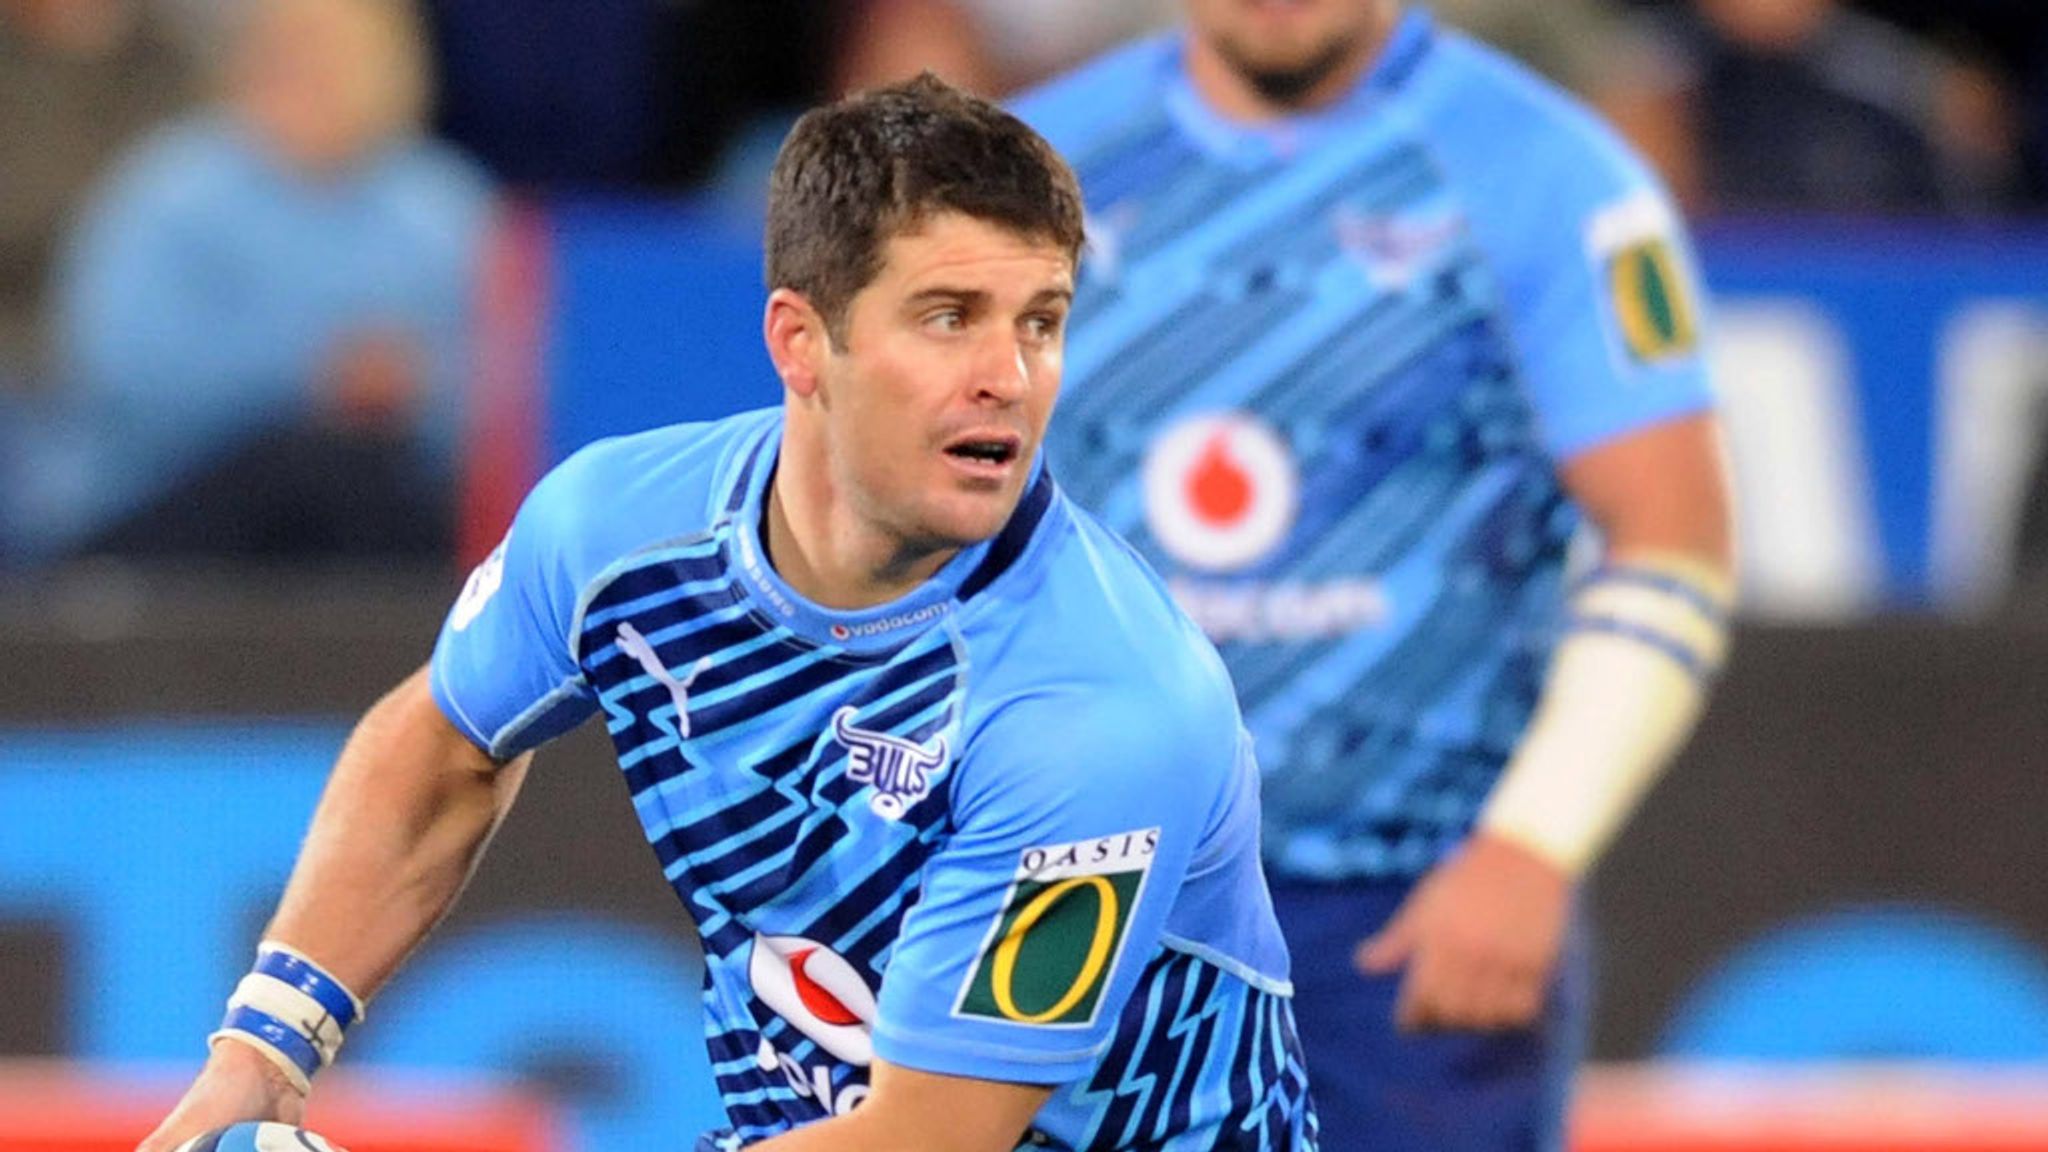 Super Rugby Bulls tough it out to drain Force Rugby Union News Sky Sports